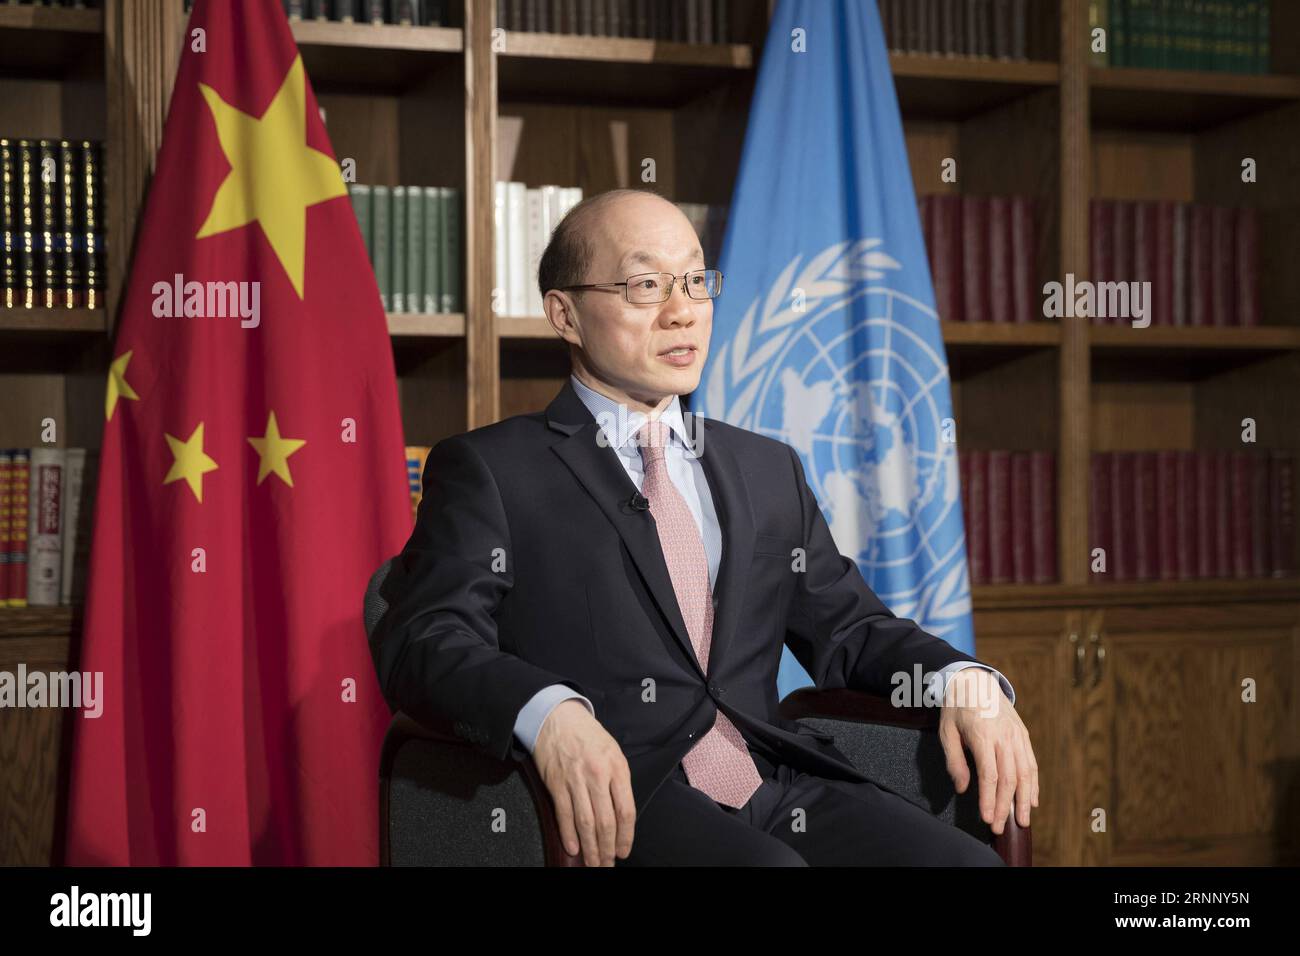 (170801) -- UNITED NATIONS, Aug. 1, 2017 -- Liu Jieyi, China s Permanent Representative to the United Nations receives an interview with Xinhua in New York, on Aug. 1, 2017. China on July 31 concluded its rotating presidency of the UN Security Council for the month of July. Under the month-long Chinese presidency, the Security Council, which is the most powerful UN body, convened more than 30 meetings, adopted four resolutions and four presidential statements, and issued seven press statements. In July, China succeeded in holding two open debates on enhancing African capacities in the areas of Stock Photo